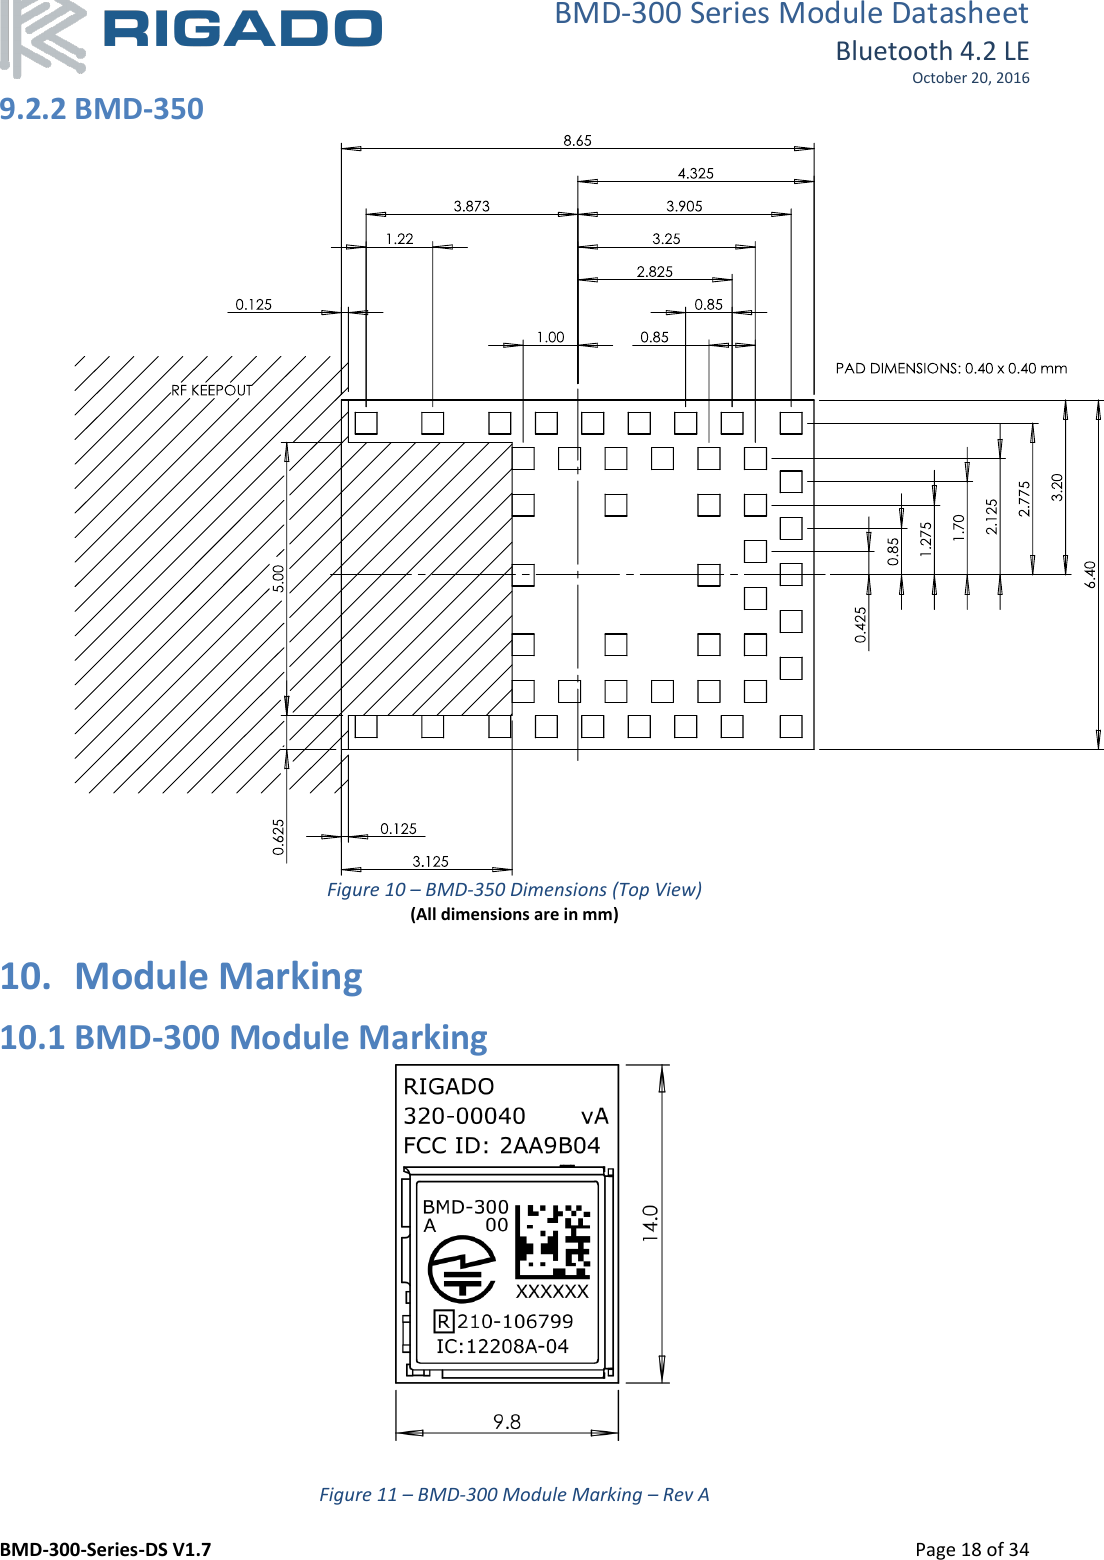 BMD-300 Series Module Datasheet Bluetooth 4.2 LE October 20, 2016 BMD-300-Series-DS V1.7         Page 18 of 34 9.2.2 BMD-350  Figure 10 – BMD-350 Dimensions (Top View) (All dimensions are in mm) 10. Module Marking 10.1 BMD-300 Module Marking  Figure 11 – BMD-300 Module Marking – Rev A 